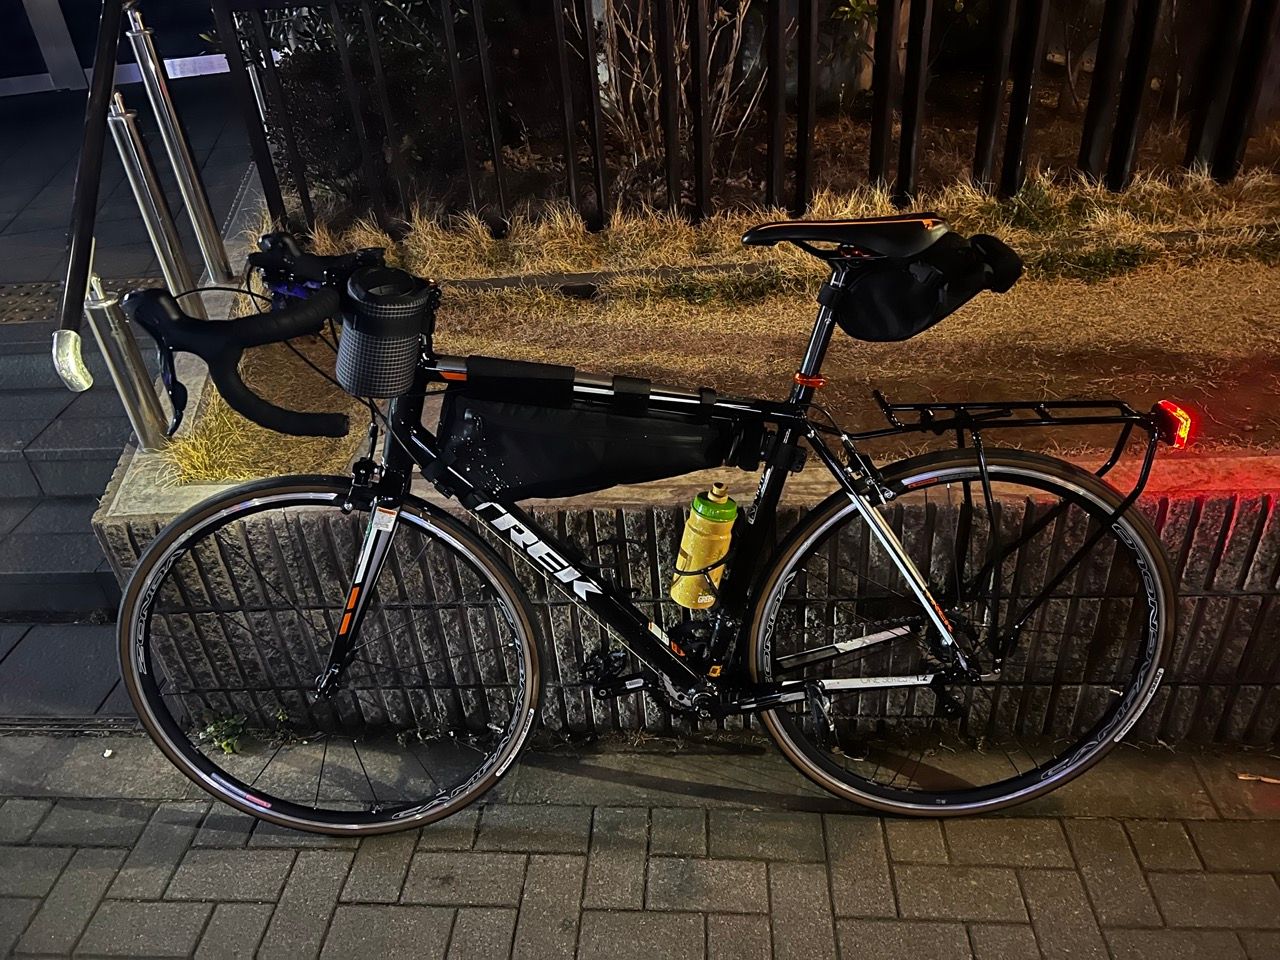 Replaced wheels and tires on a road bike (Trek 1.2 2014)